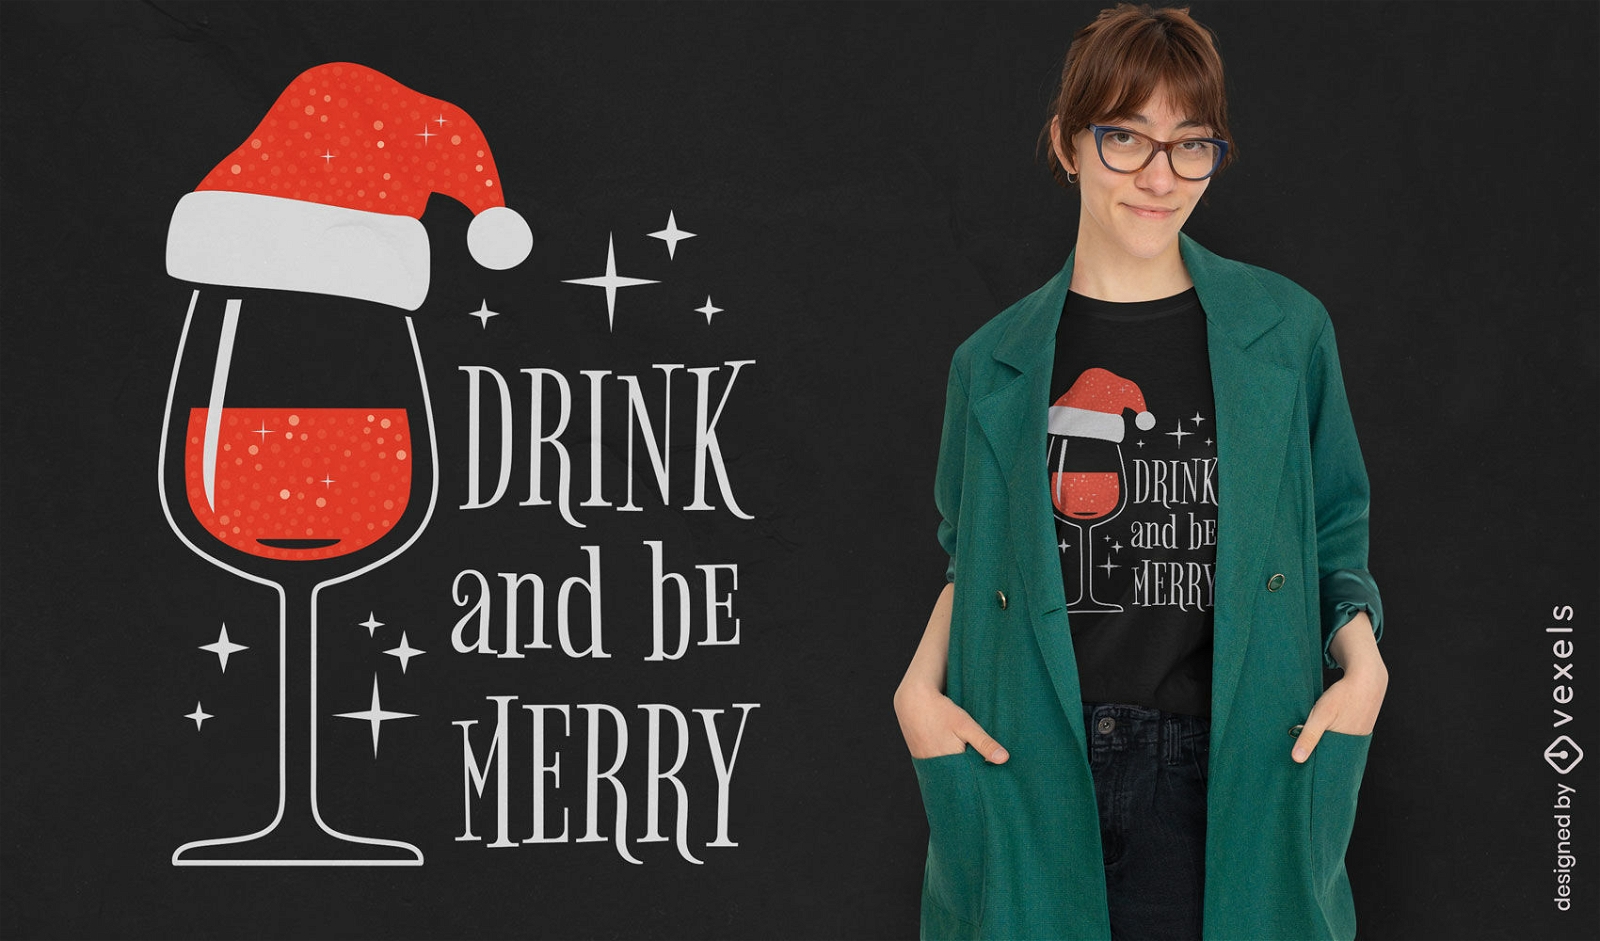 Drink and be merry t-shirt design